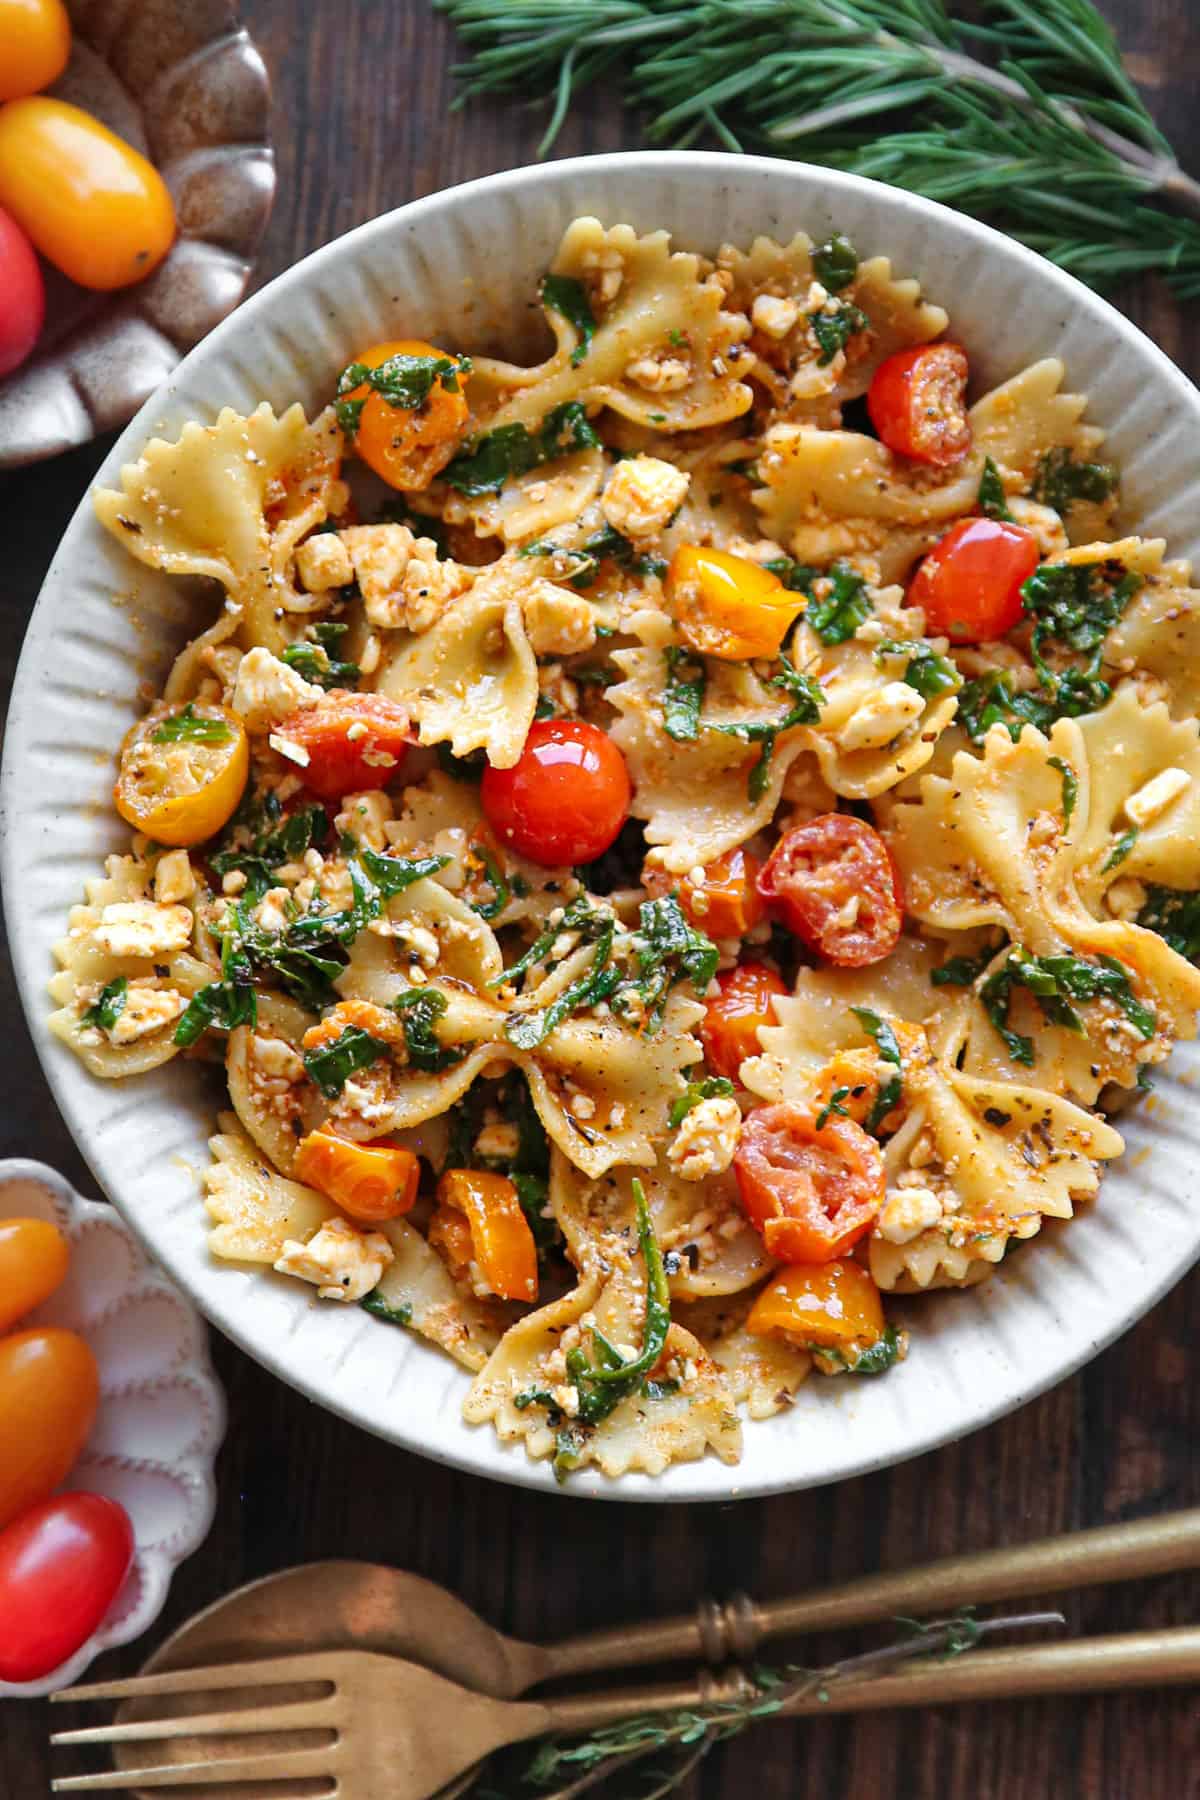 Bow-Tie Pasta with Feta Cheese, Cherry Tomatoes, and Spinach - in a white bowl.